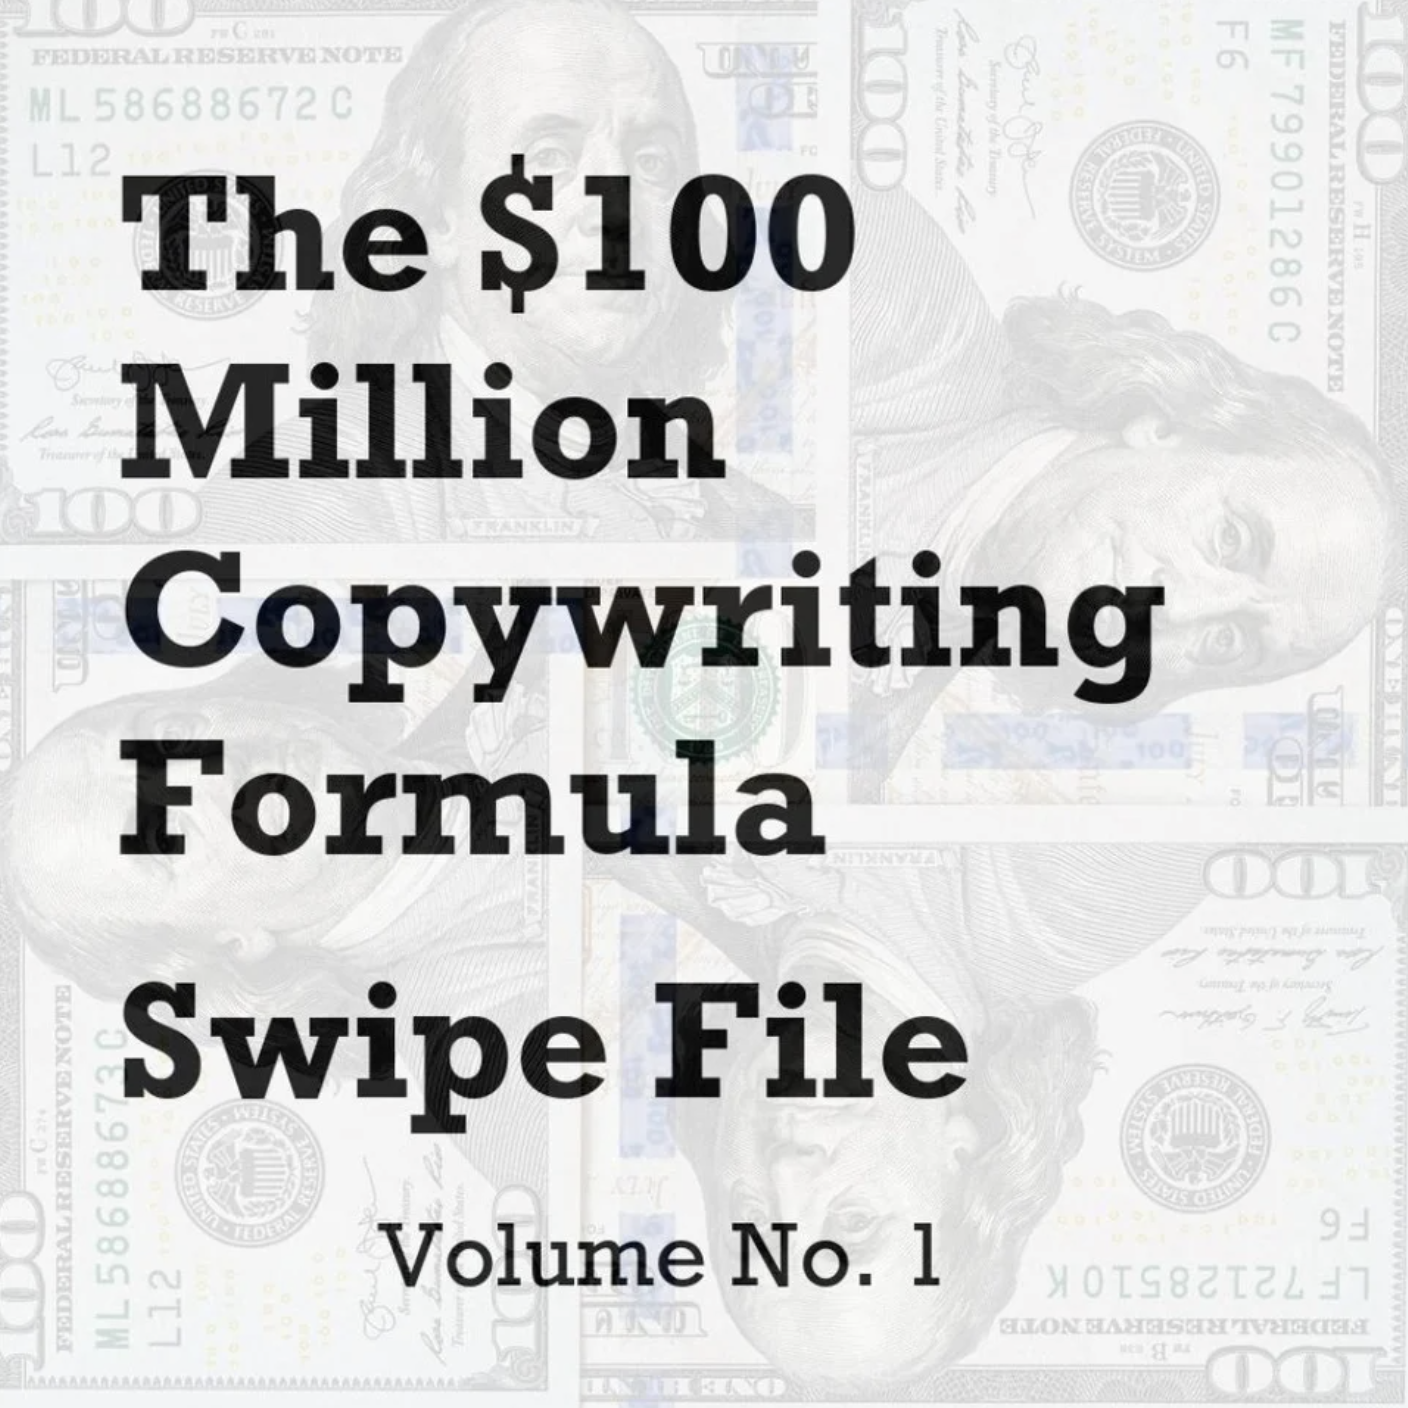 You are currently viewing The $100 Million Copywriting Formula Swipe File. Vol. 1